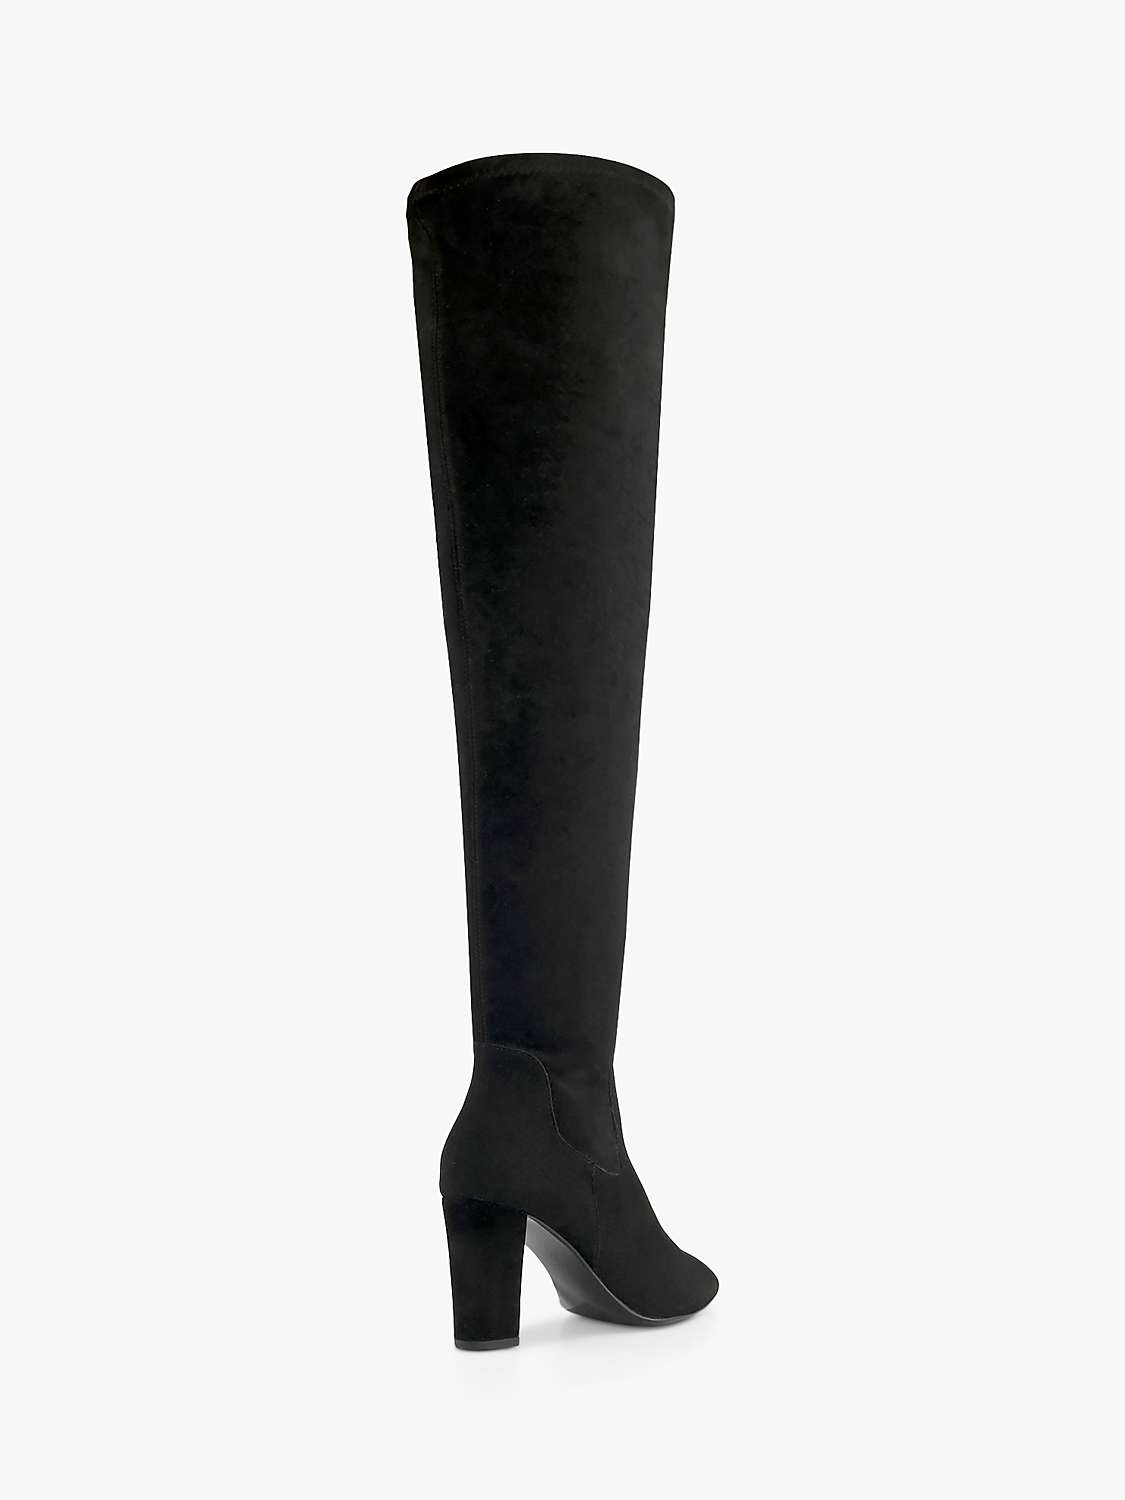 Dune Syrell Over The Knee Block Heel Boots, Black at John Lewis & Partners